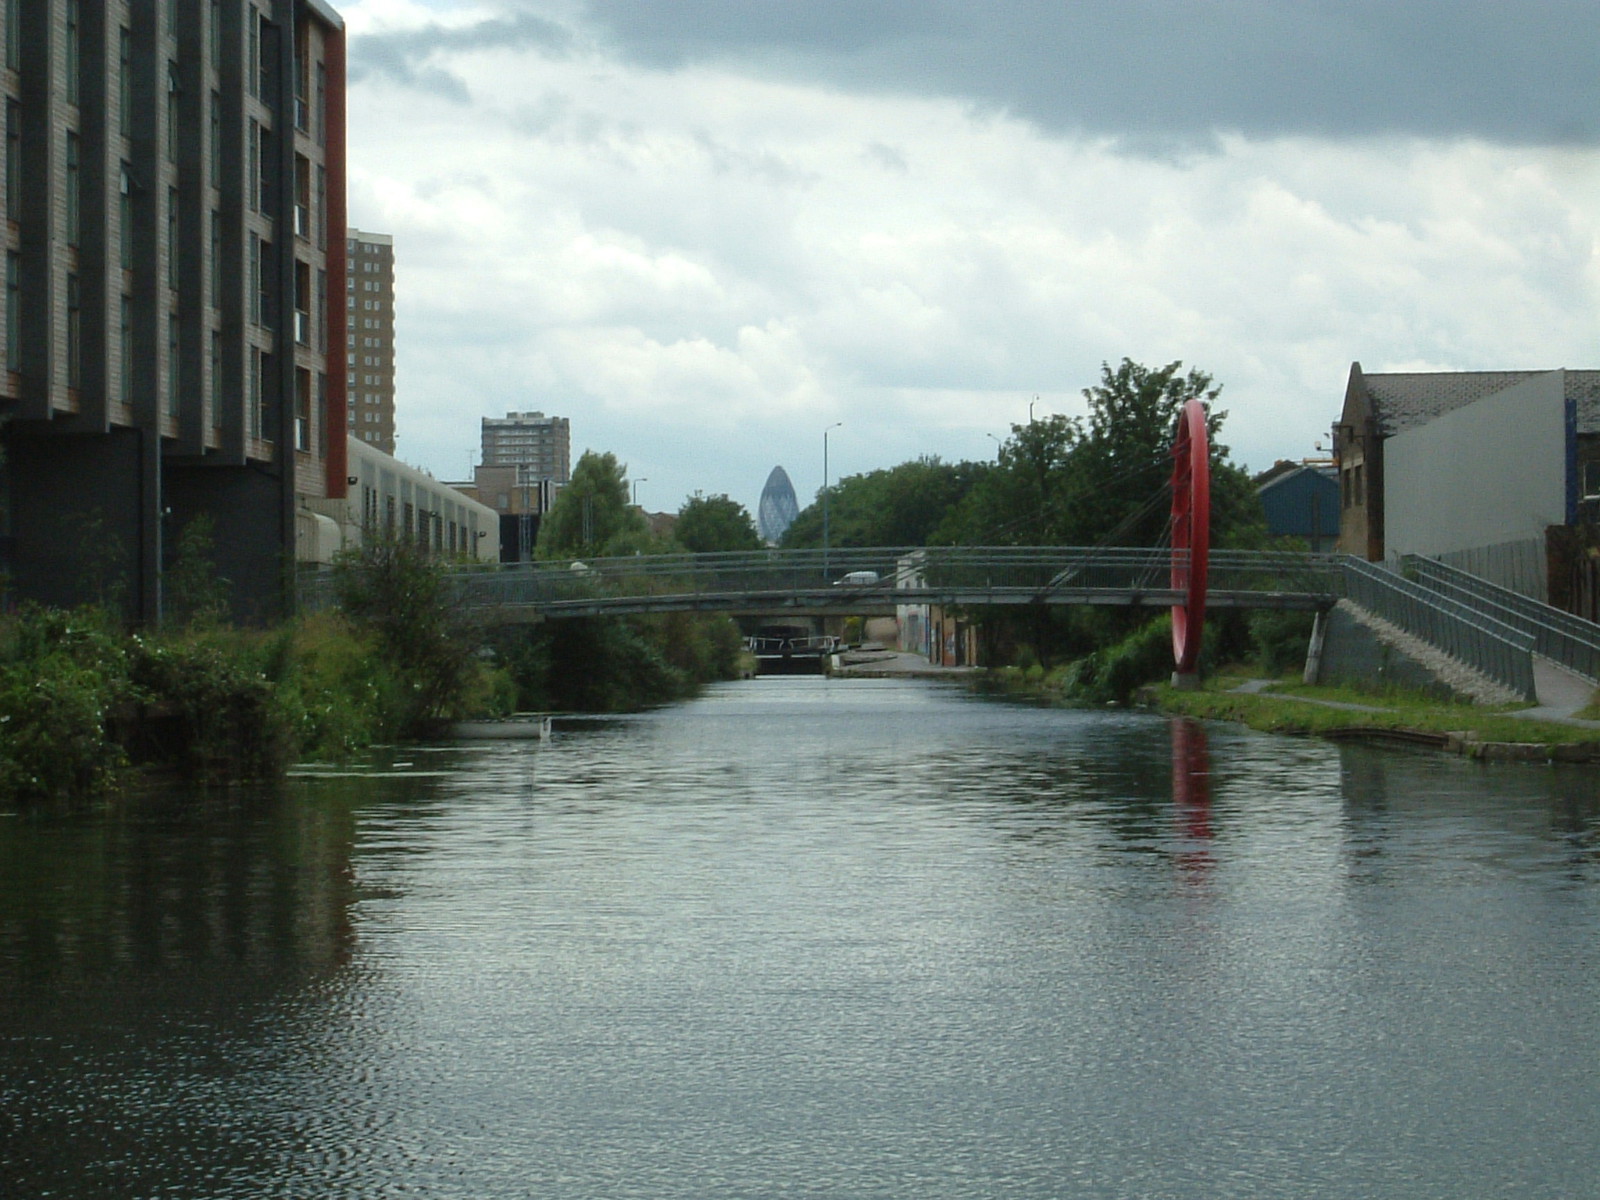 The Hertford Union Canal, with the Gherkin in the background